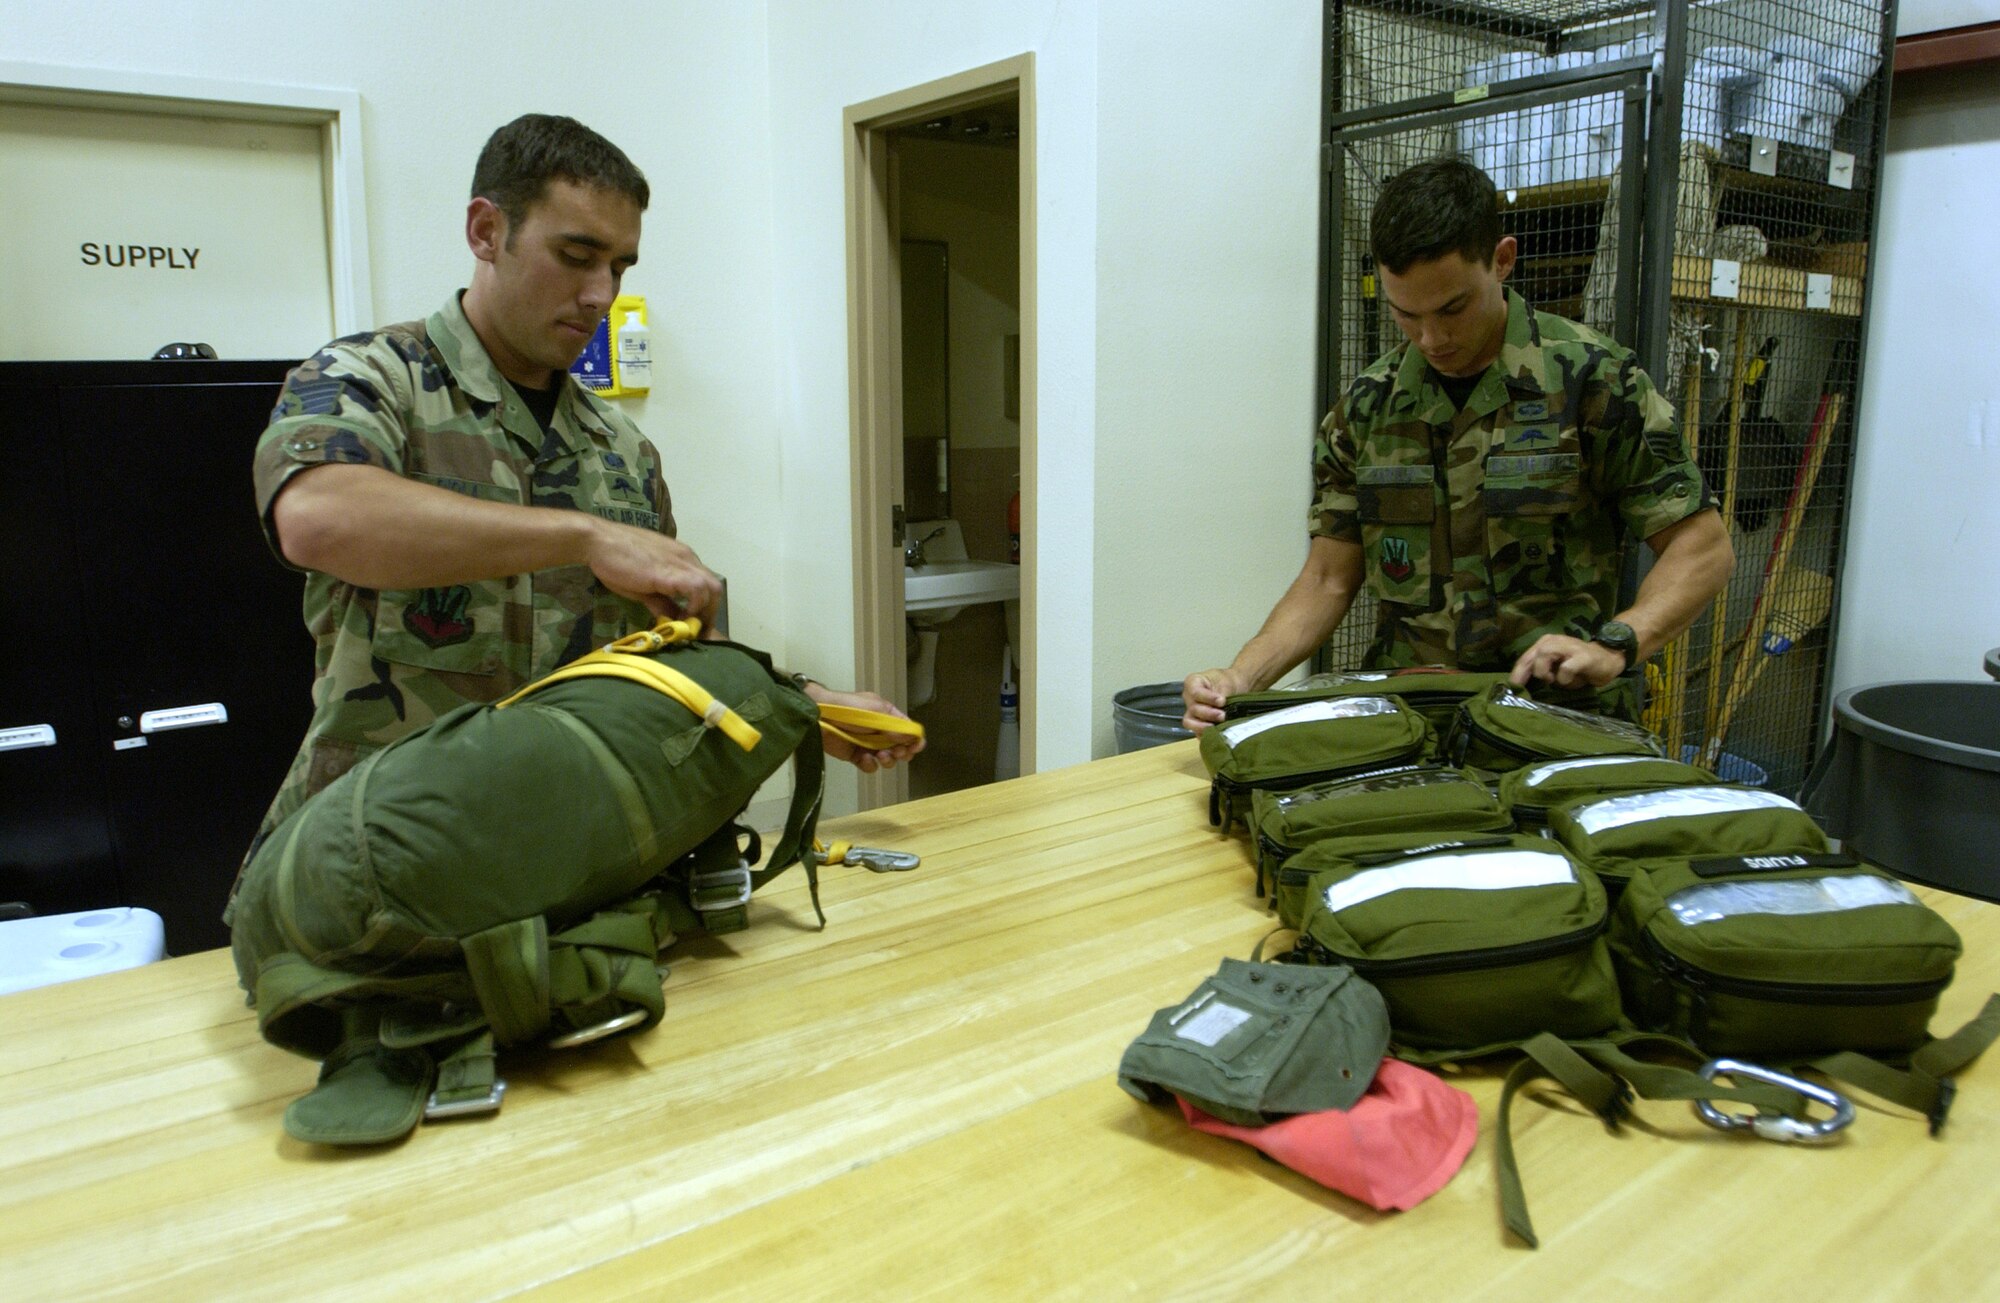 Staff Sgt. Jeremy Diola (left) checks his parachute, while Senior Airman Ryan Hatfield checks his medical bag. Both are members of the 58th Rescue Squadron at Nellis AFB. The two recently treated six people involved in a major automobile accident at Lake Mead, Nev. (Photo by Airman 1st Class Jason Huddleston)